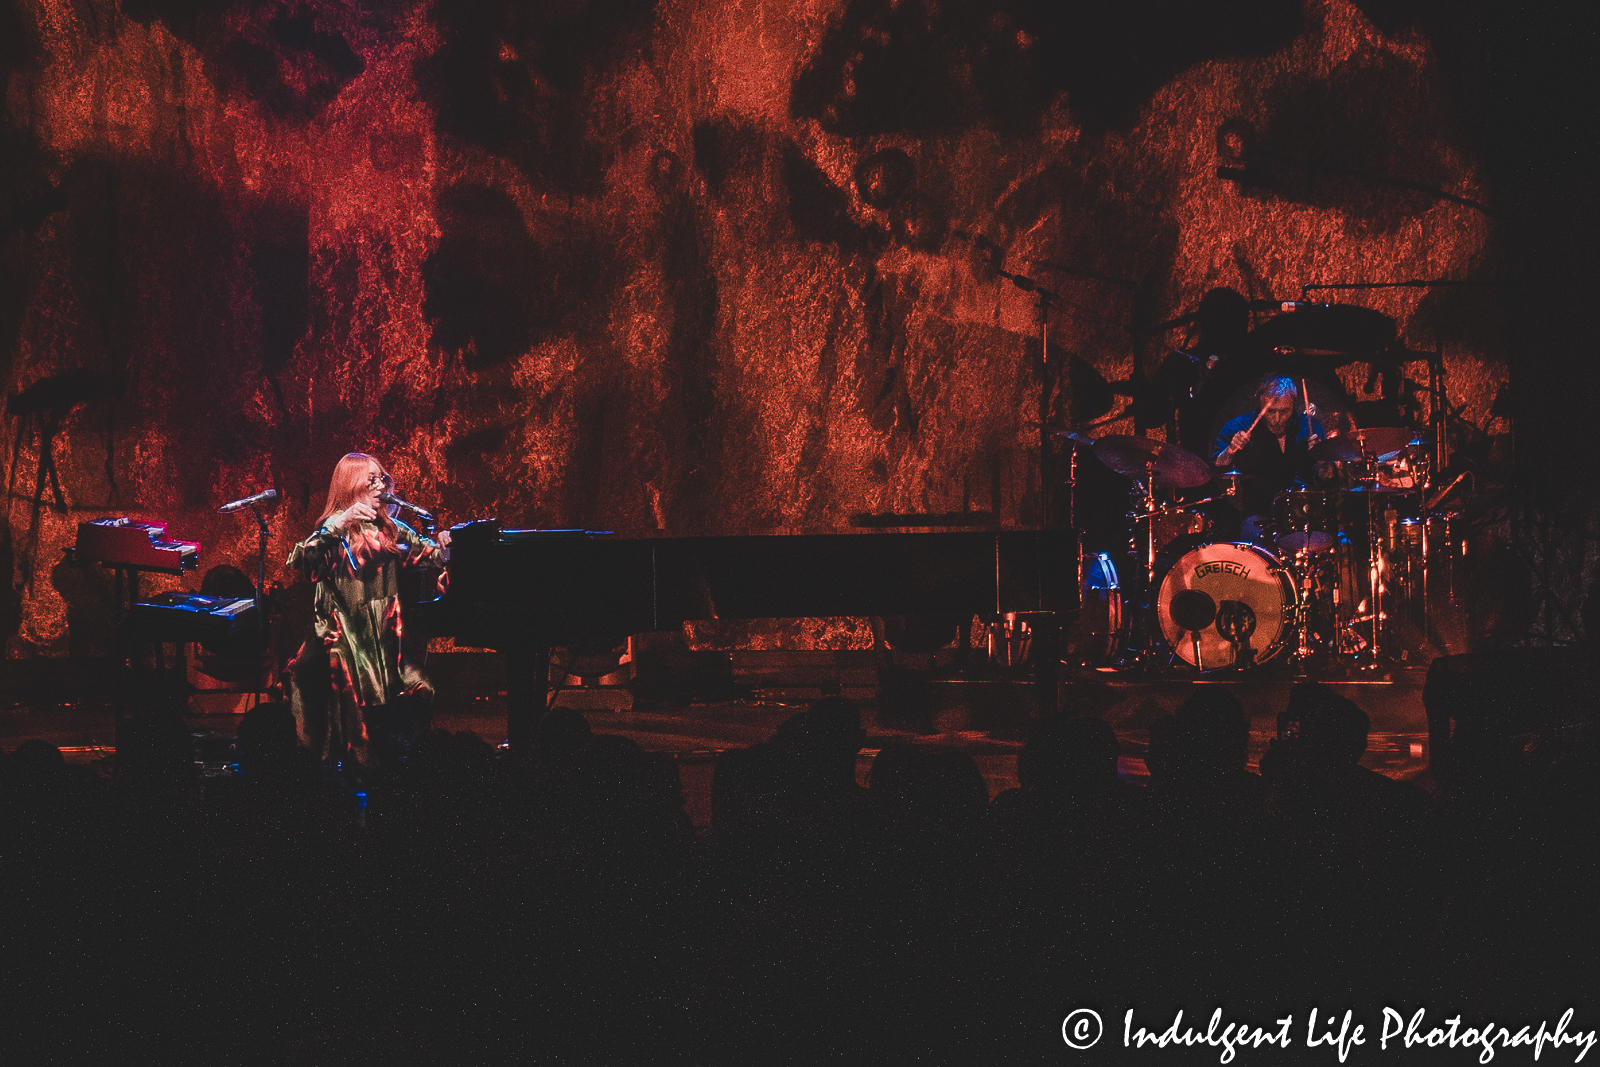 Singer-songwriter and pianist Tori Amos and drummer Ash Soan opening her "Ocean to Ocean" concert tour performance at Kansas City Music Hall on May 31, 2022.